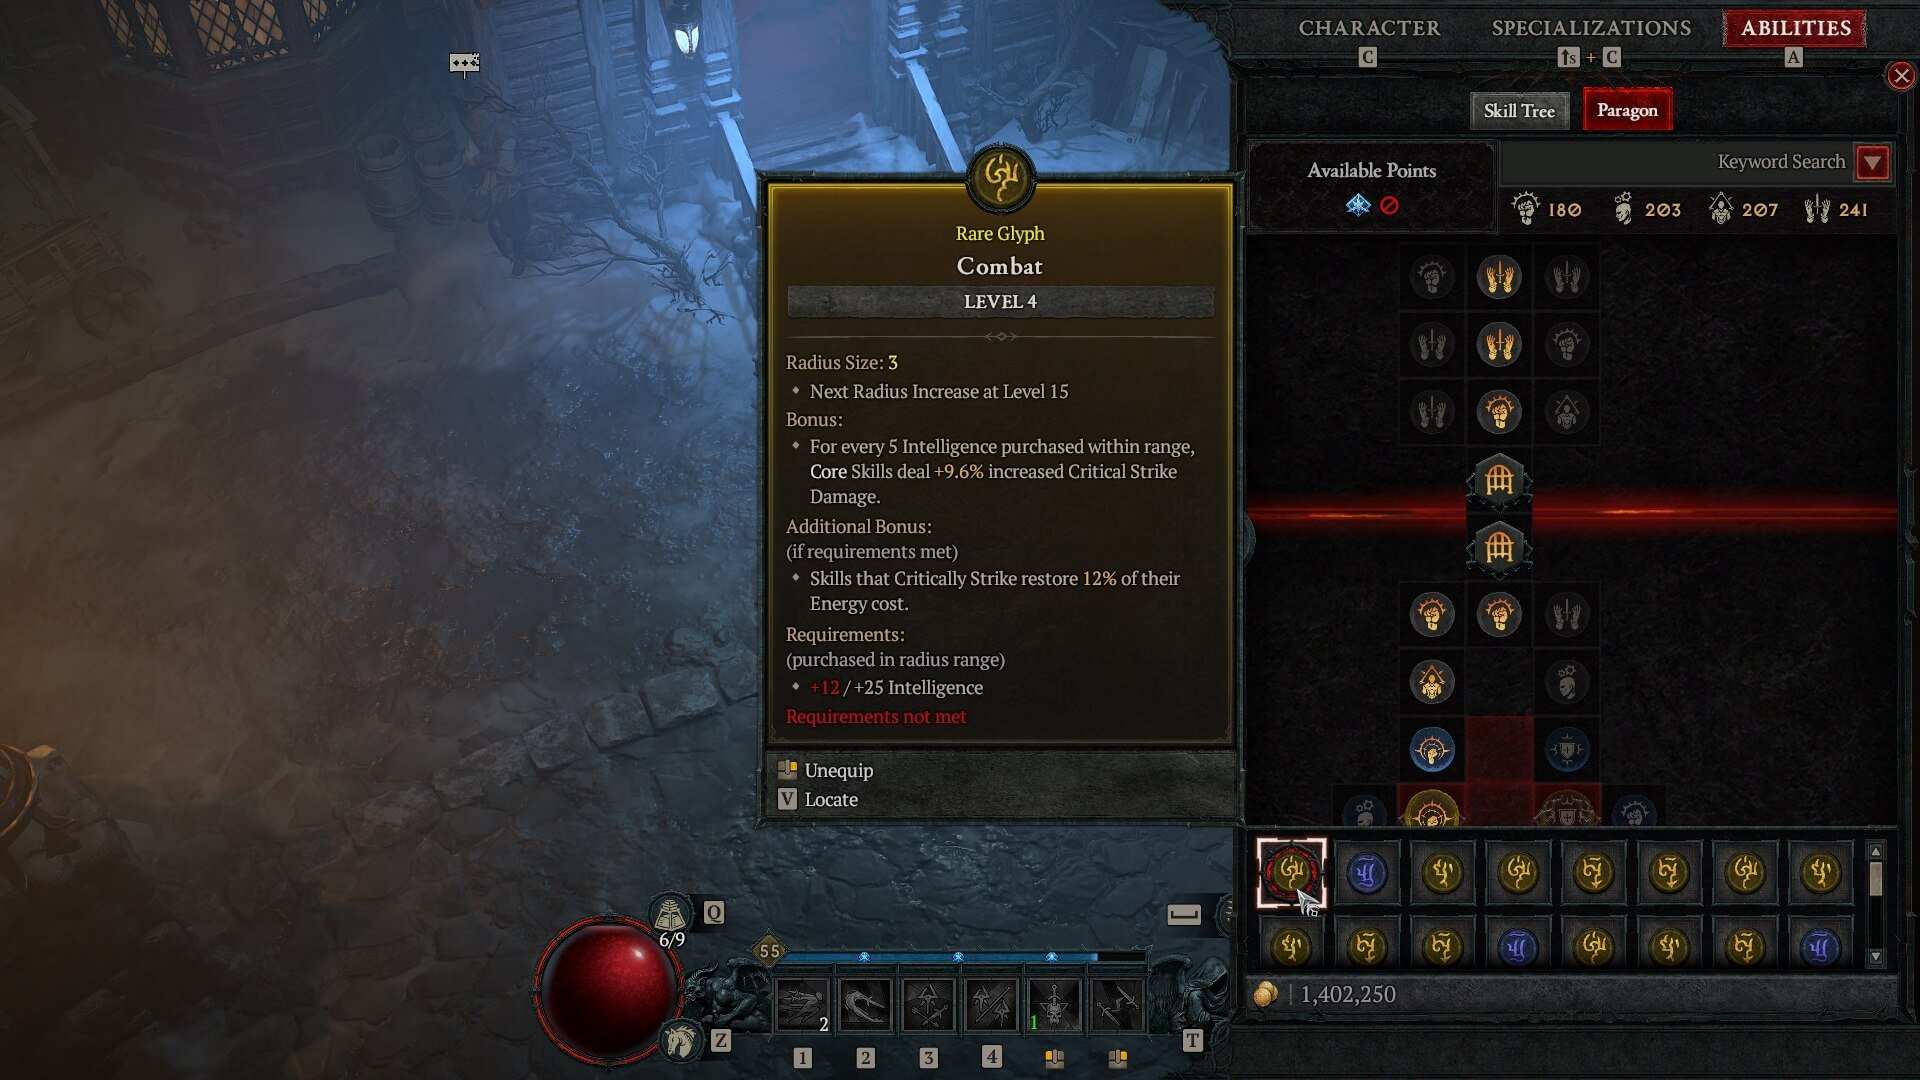 The Combat Rare Glyph being highlighted in Diablo IV.